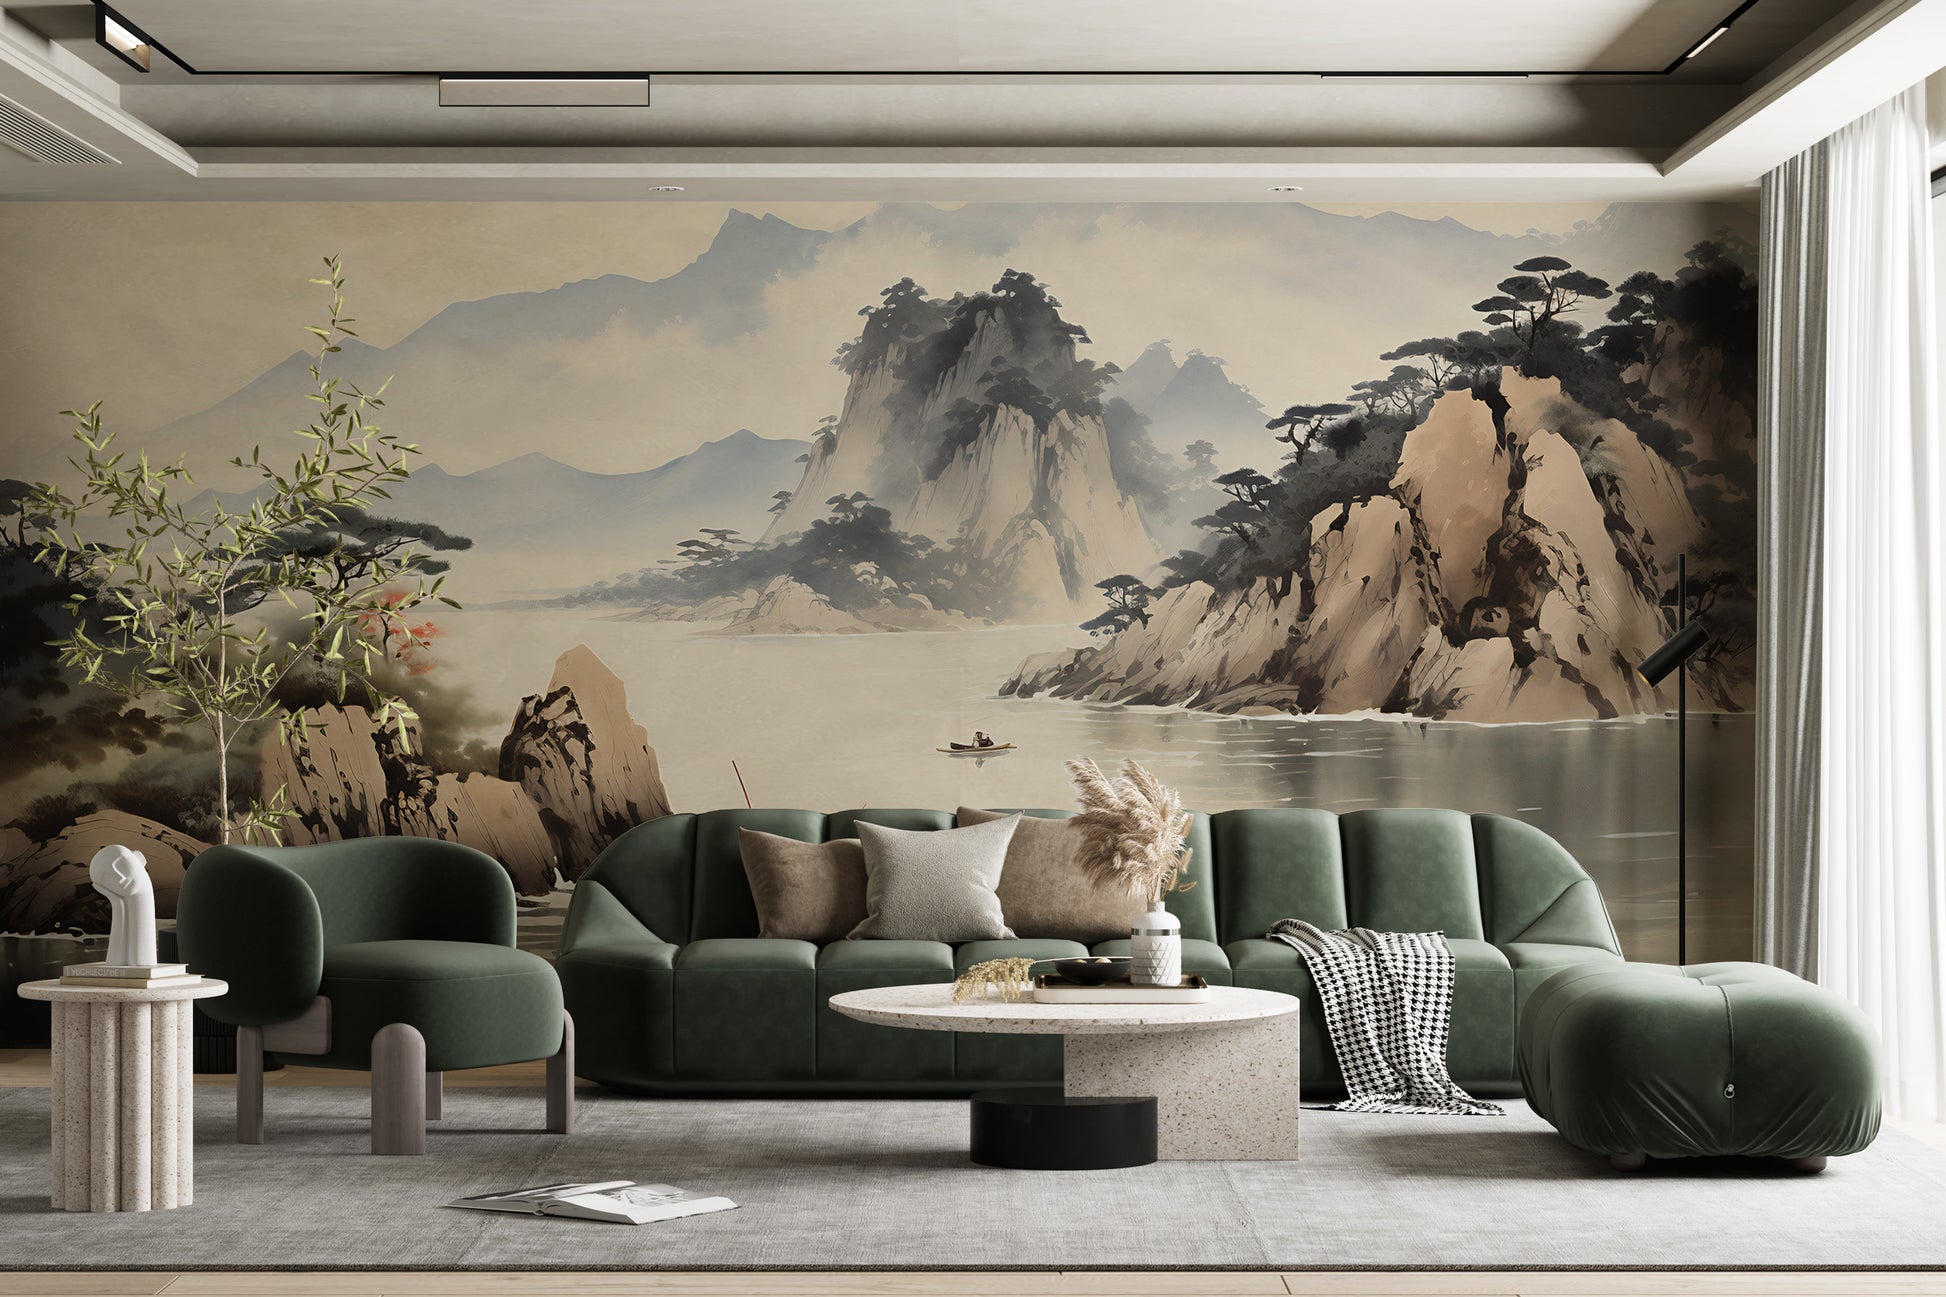 Timeless Chinese Landscape Mural